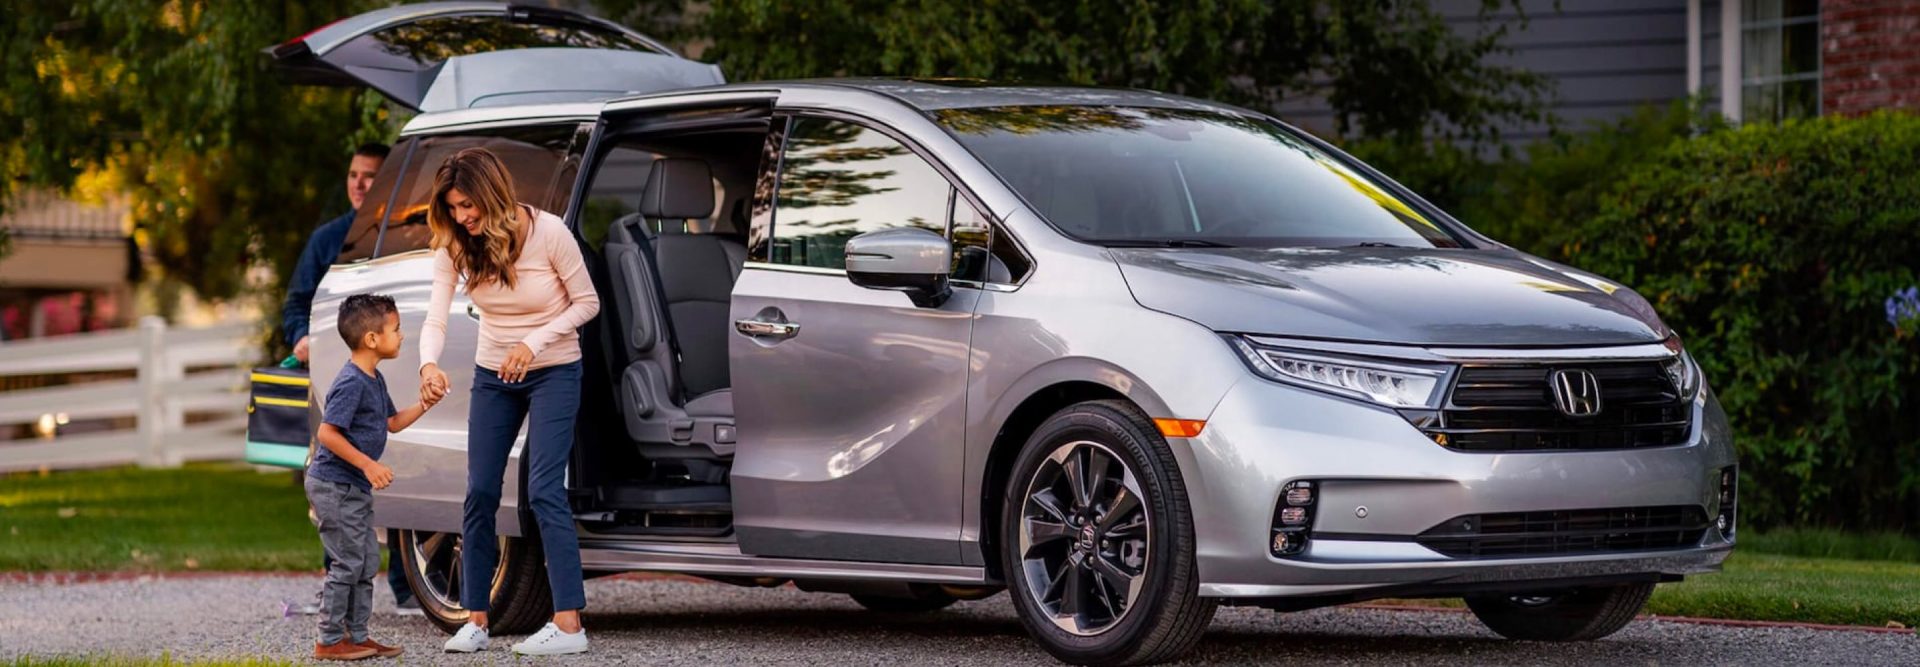 Honda Odyssey opened with a woman and a child standing beside